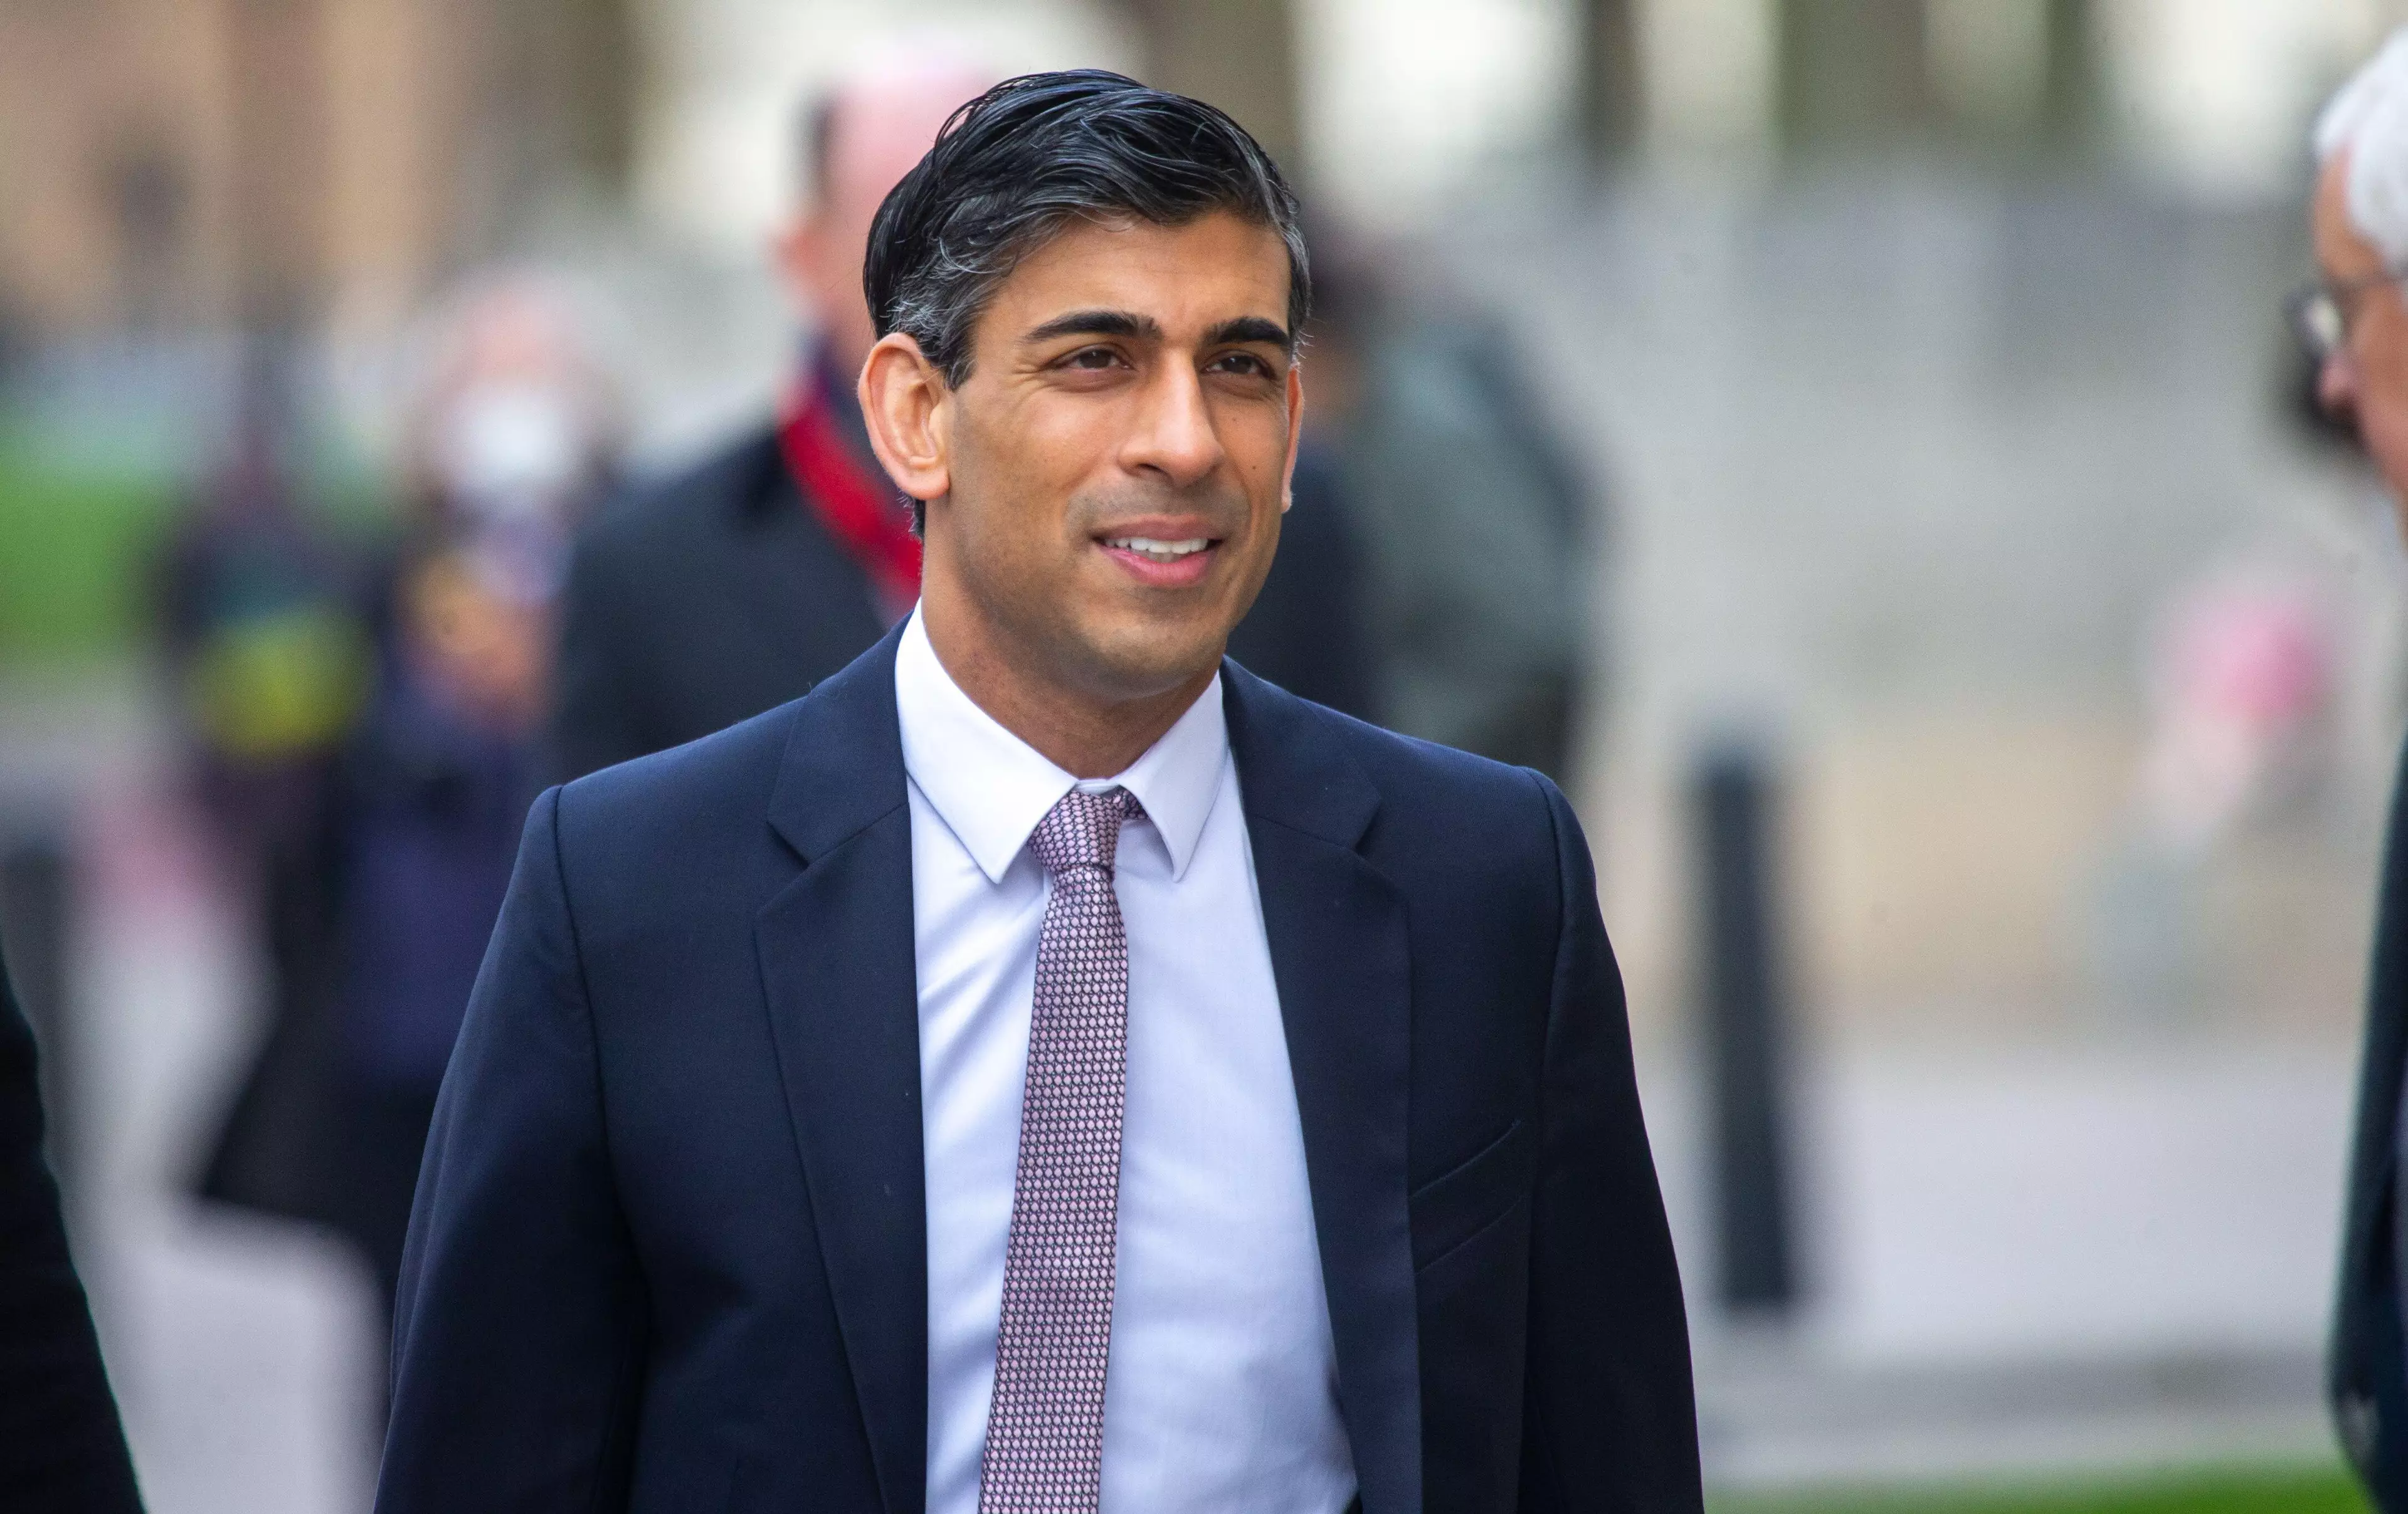 On Wednesday, chancellor Rishi Sunak will unveil his Spring Statement (